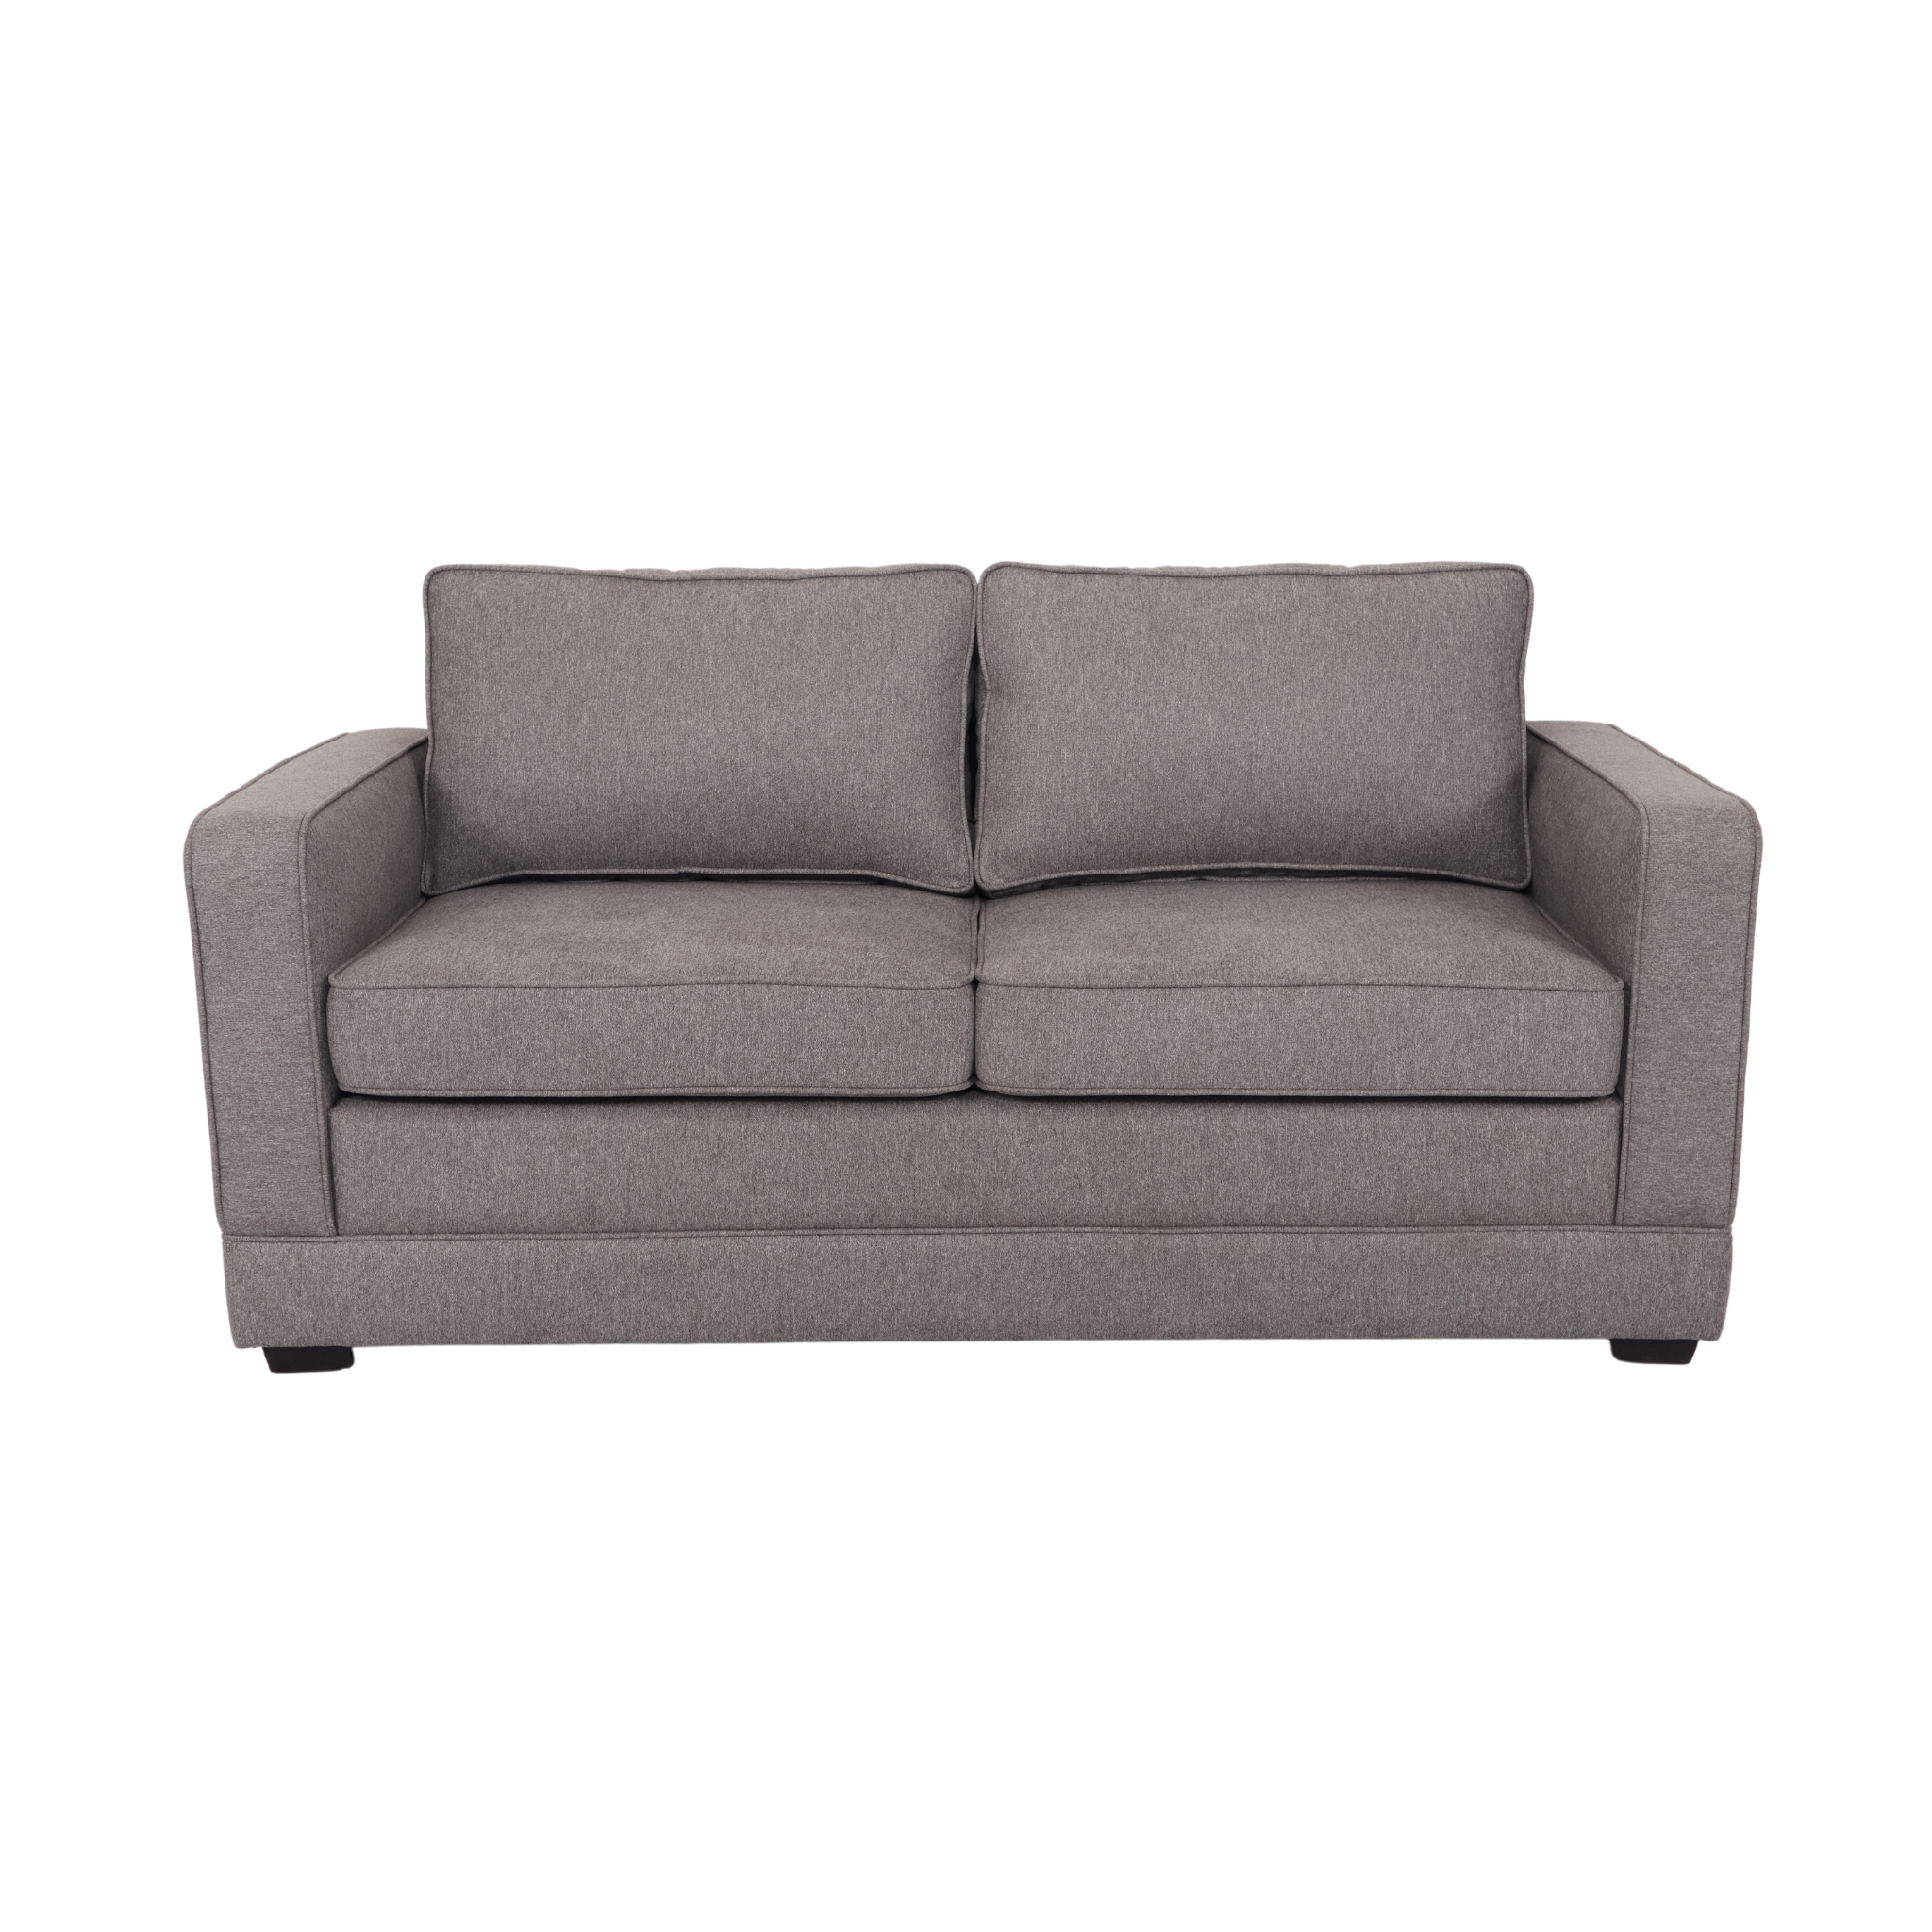 KENNETH Fabric Sofa with Pull-Out Bed AF Home